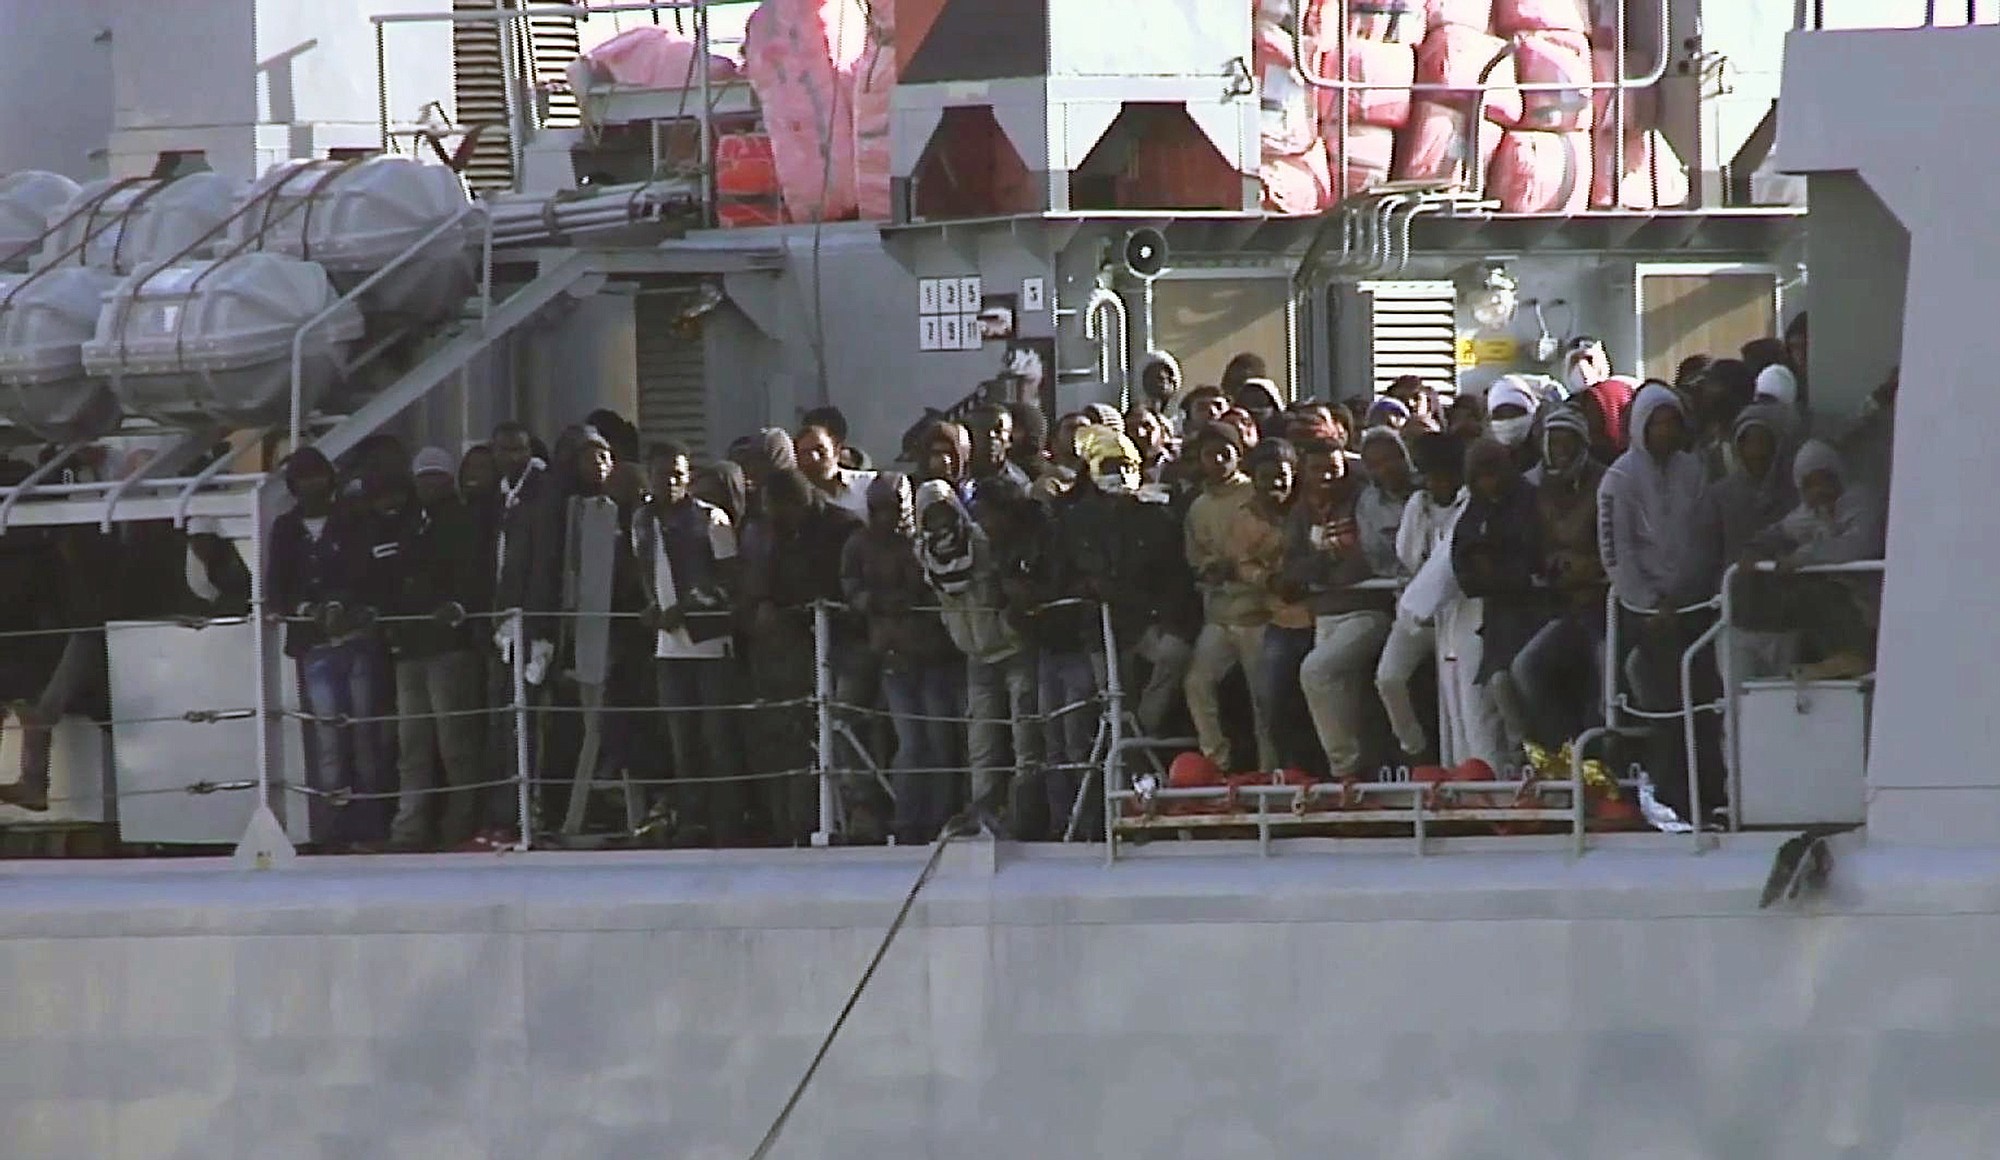 In this image from TV, migrants crowd at the rail aboard an Italian navy vessel as it cruises toward the Italian port of Messina on Saturday.